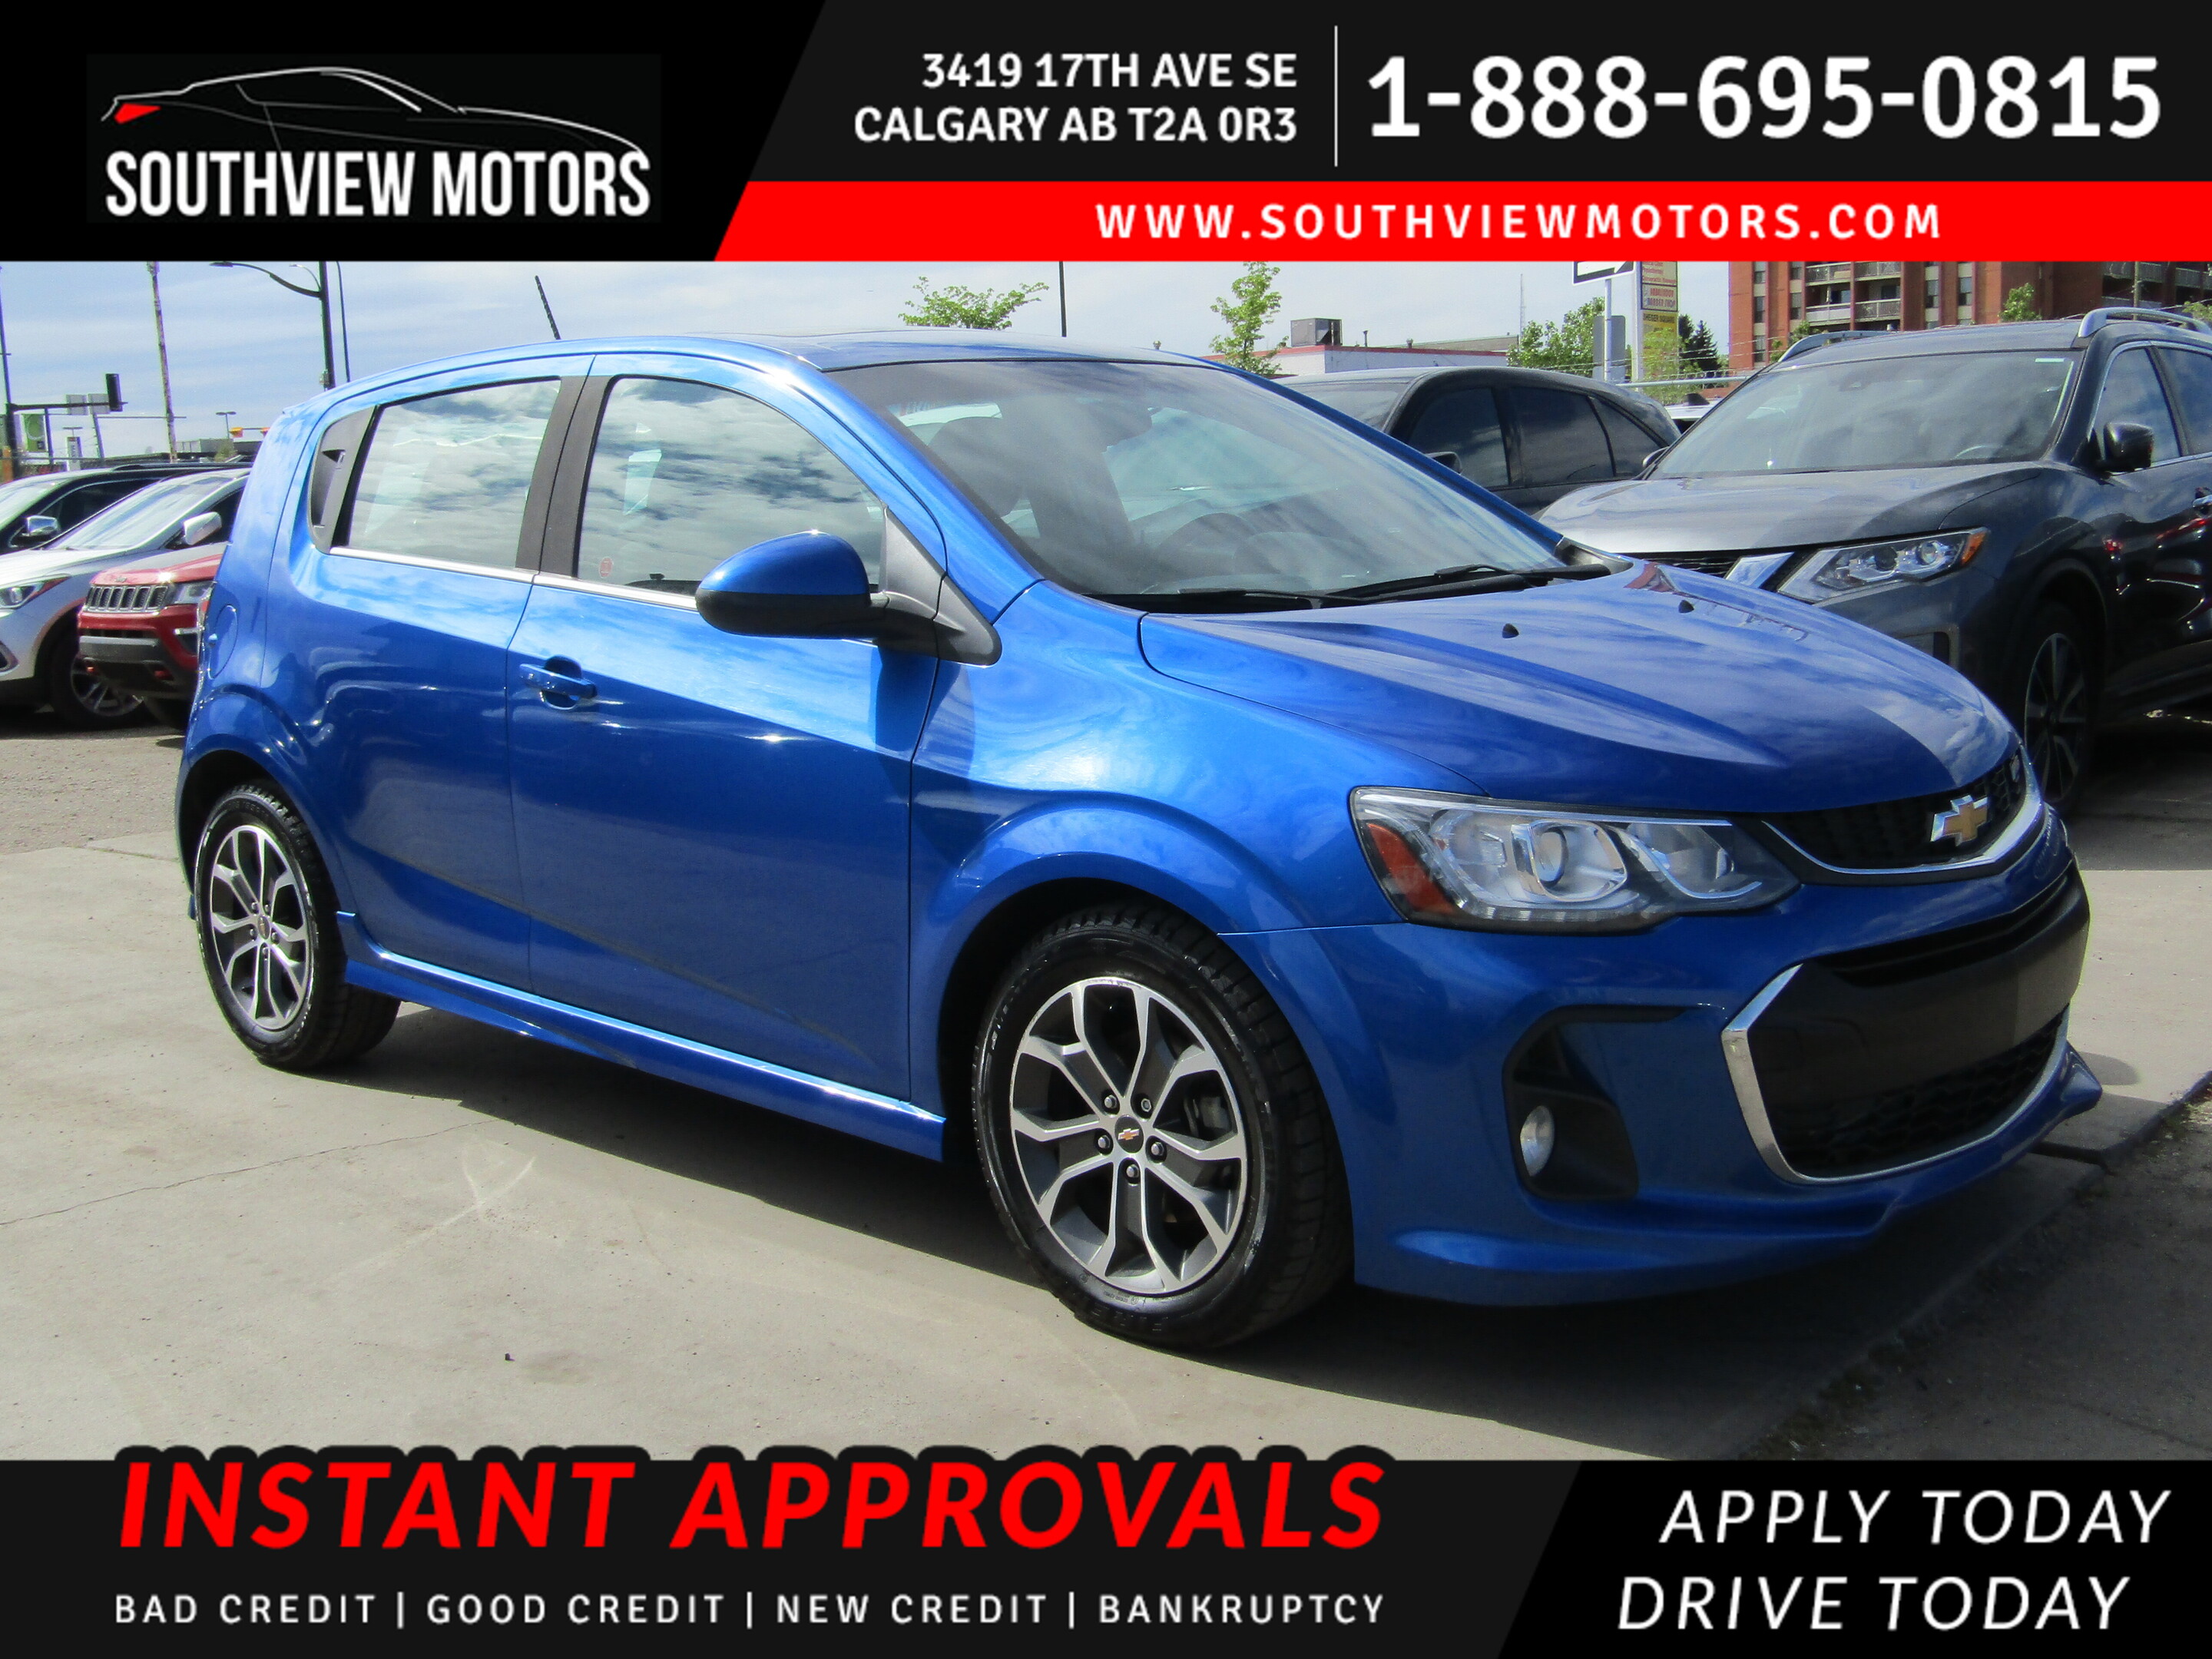 2017 Chevrolet Sonic LT RS TURBO B.CAMERA/SUN.ROOF/R.START/NO ACCIDENTS